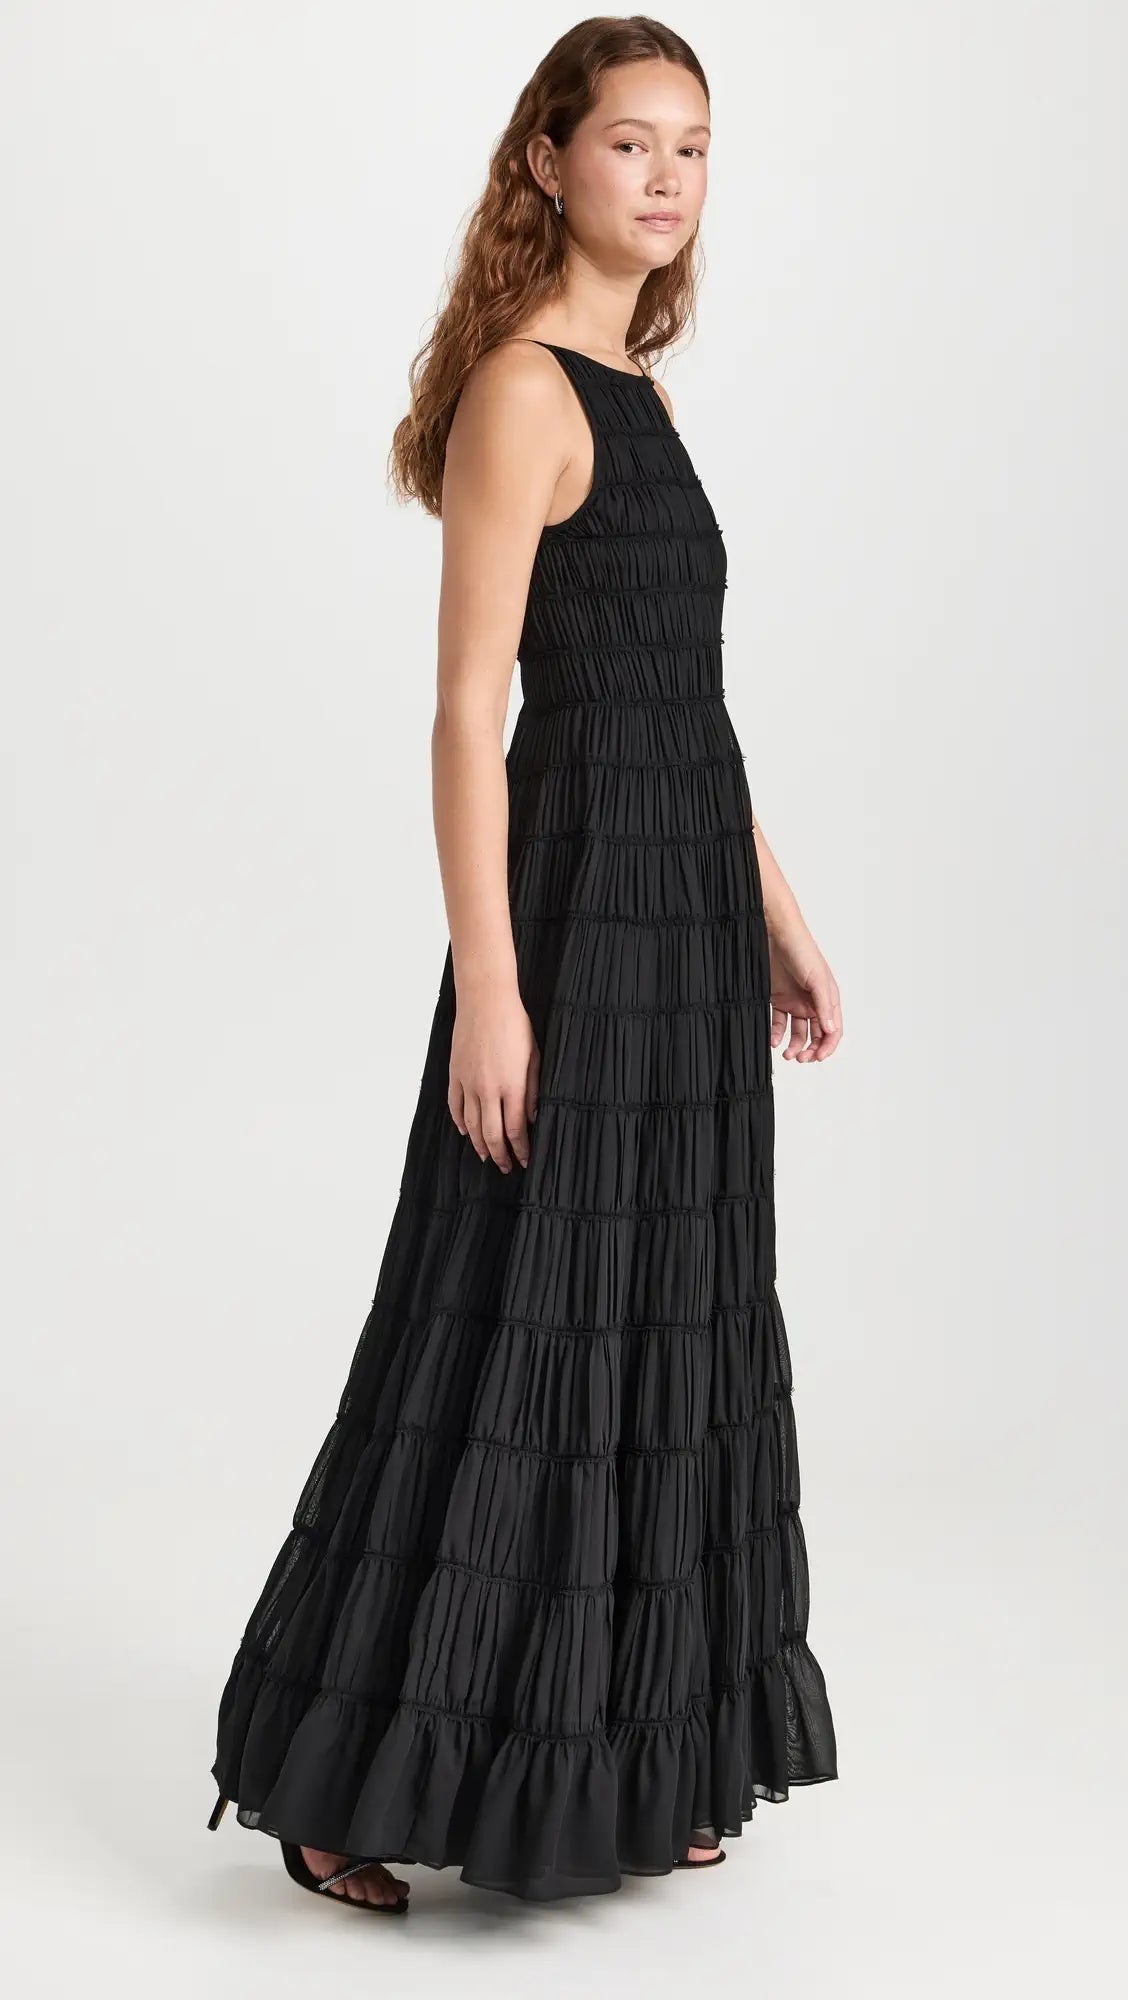 Rosewood Ruched Gown - Black dresses Aje 